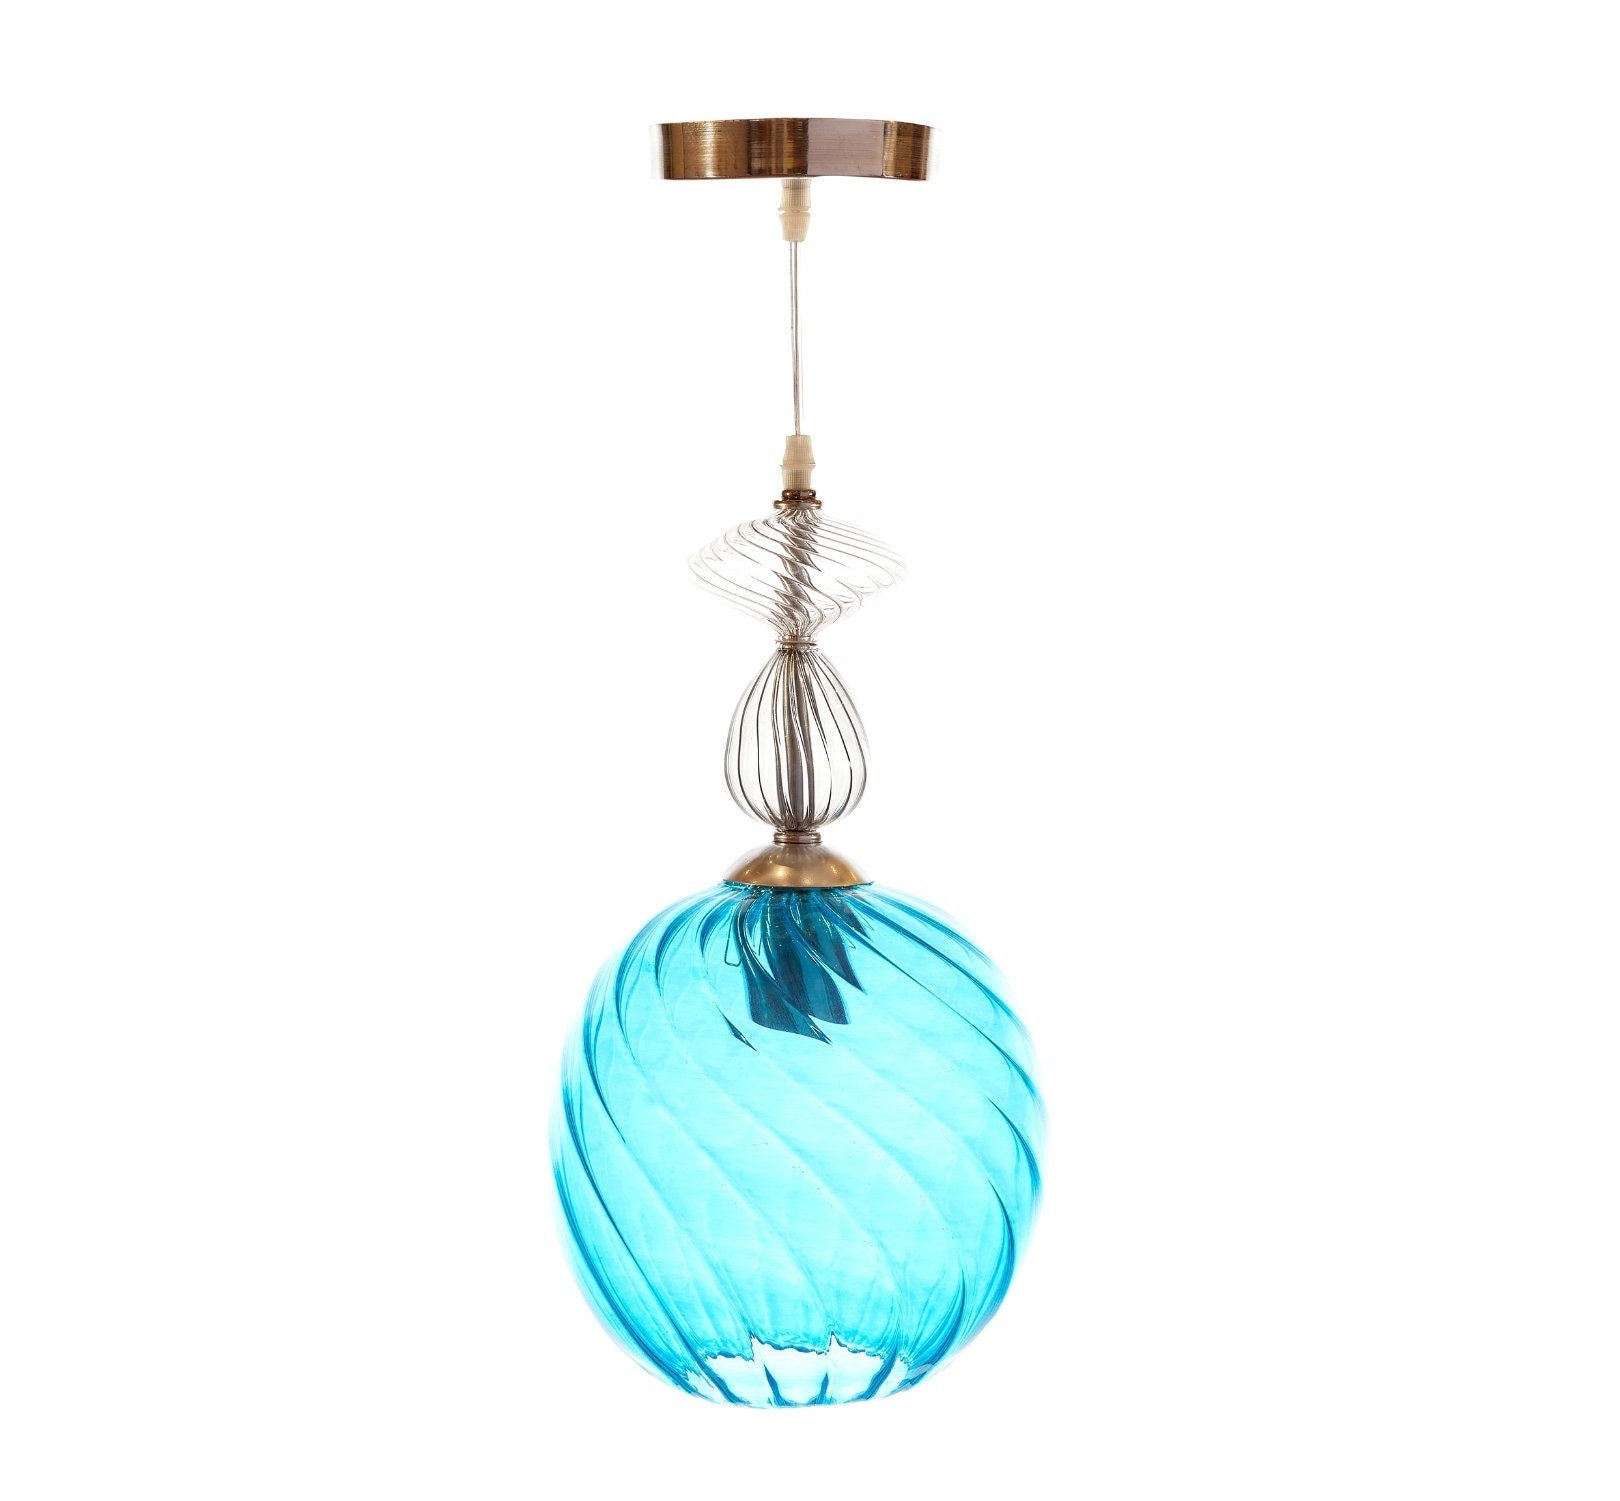 Swirl Ribbed Glass Light Fixture for Room Decor - Les Trois Pyramides